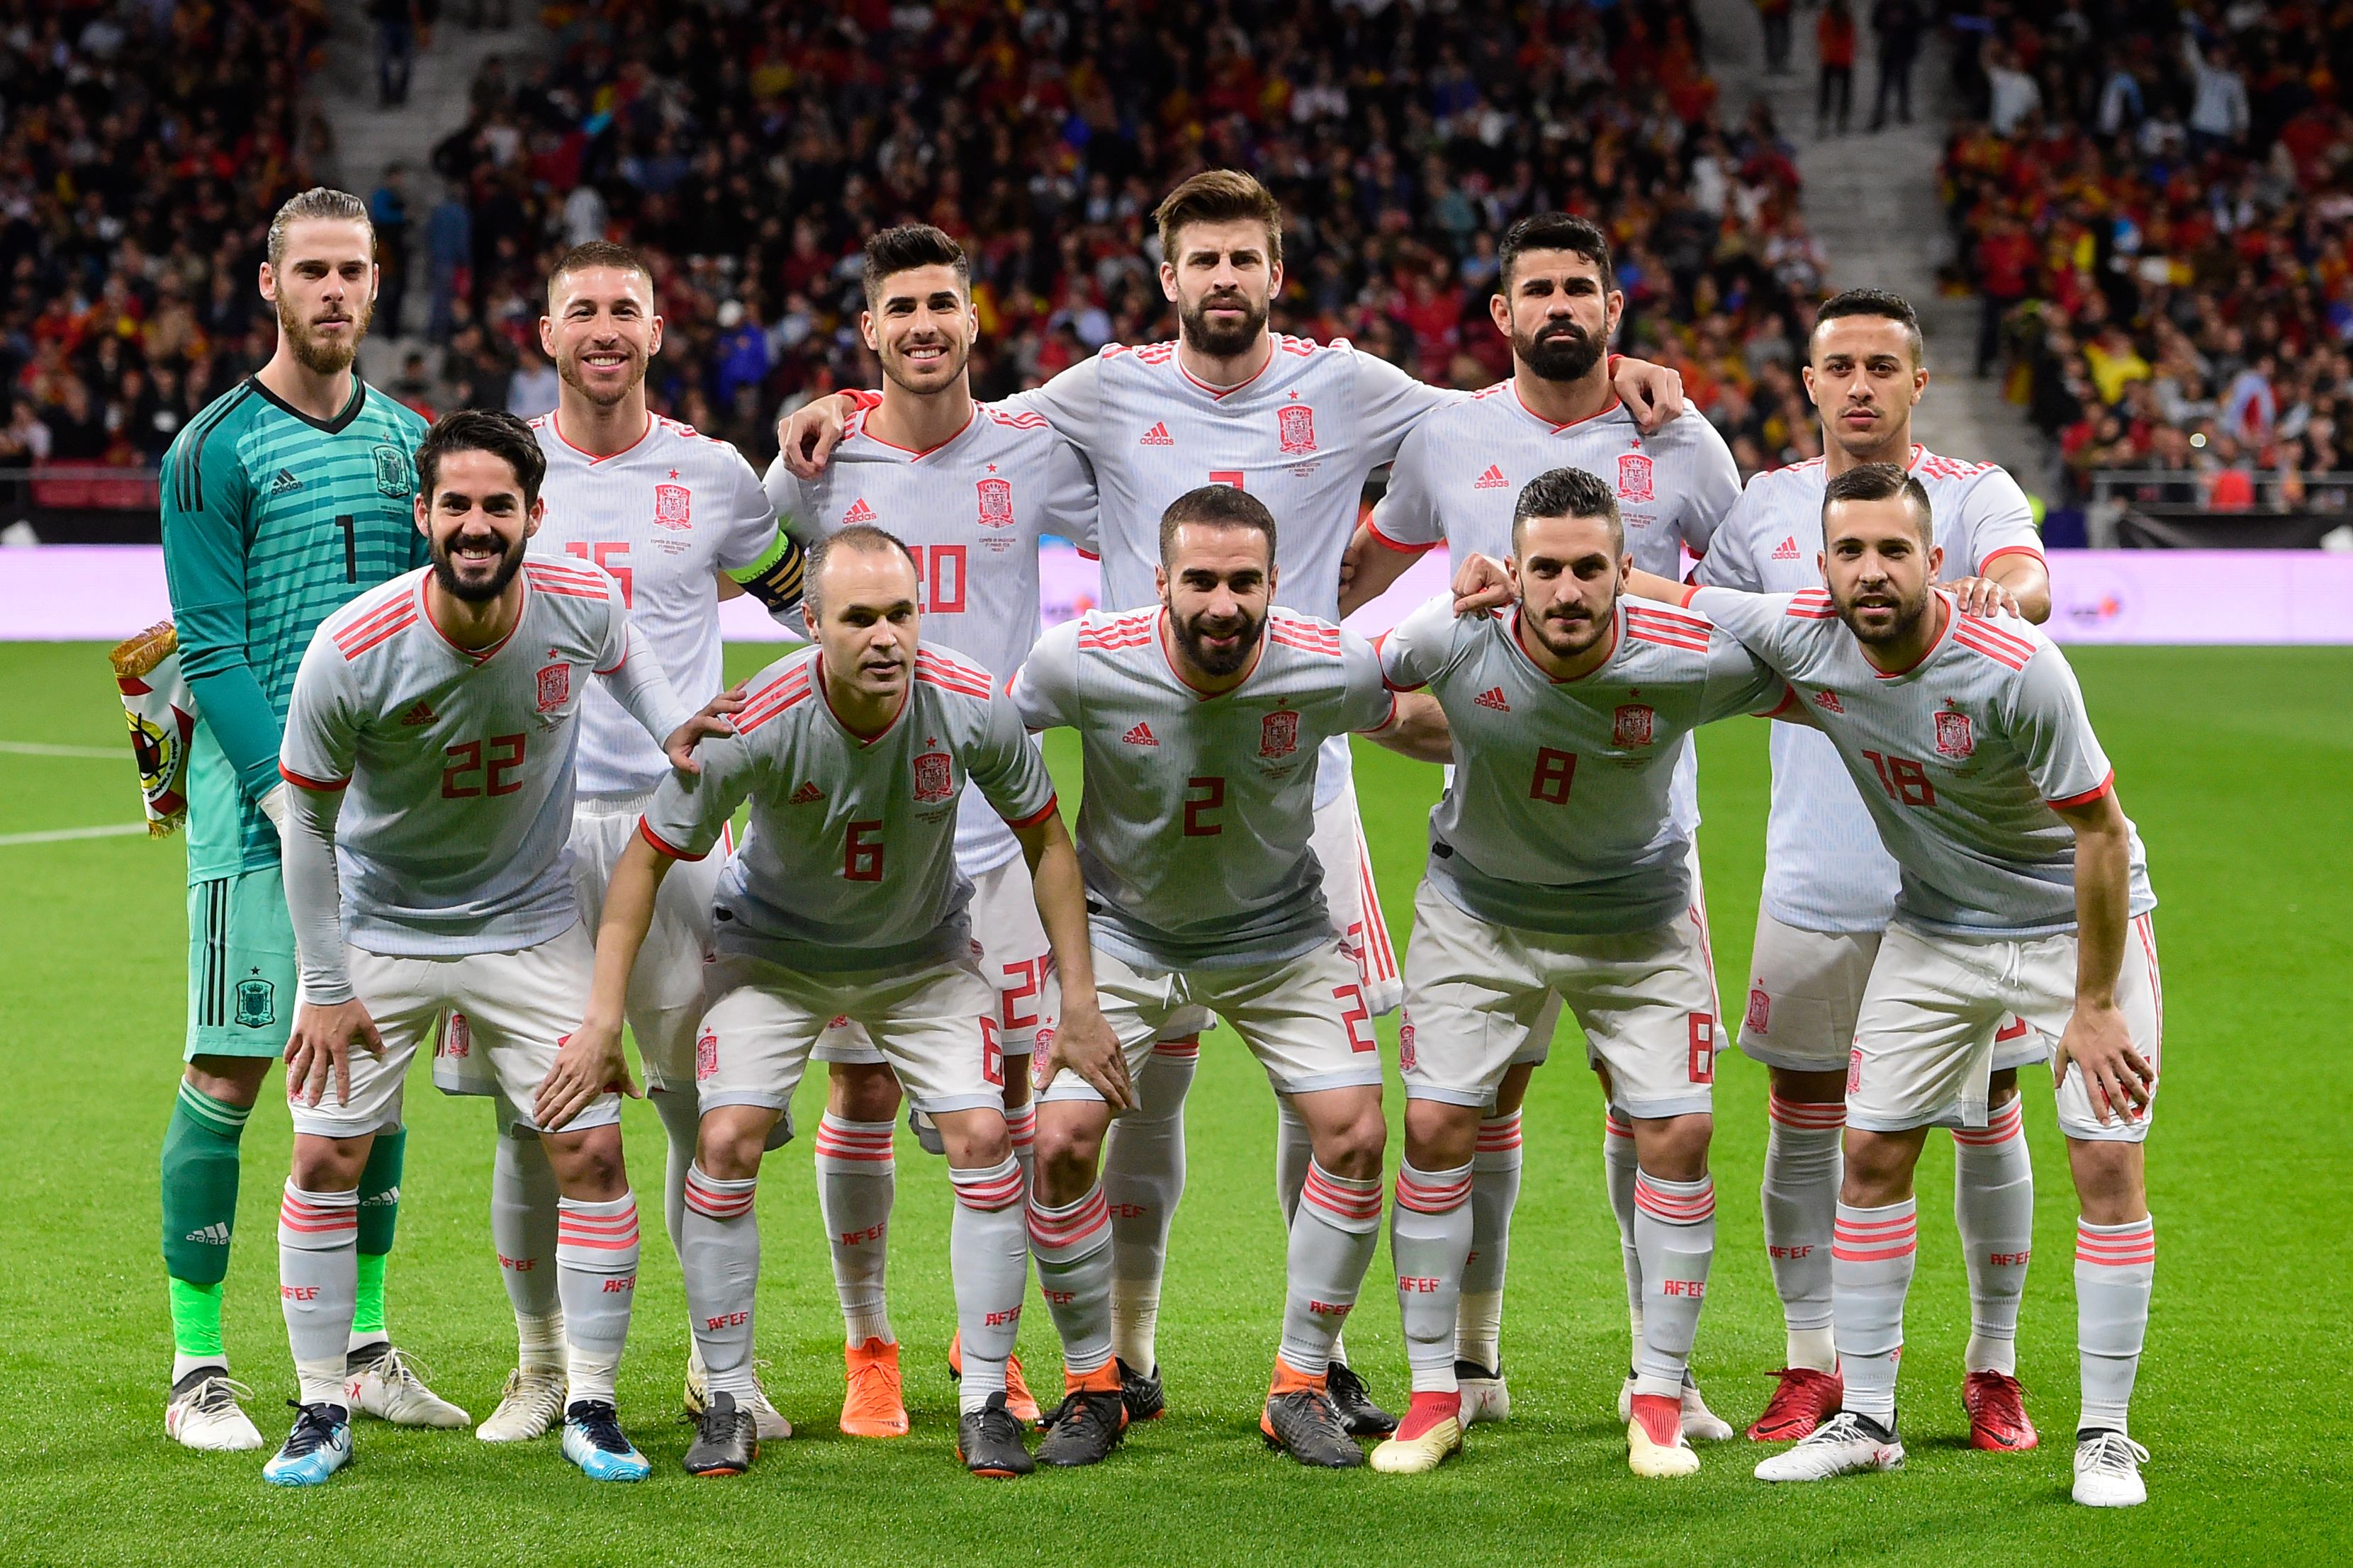 (Back L-R) Spain's goalkeeper David de Gea, Spain's defender Sergio Ramos, Spain's midfielder Marco Asensio, Spain's defender Gerard Pique, Spain's forward Diego Costa, Spain's midfielder Thiago, (L-R) Spain's midfielder Isco, Spain's midfielder Andres Iniesta, Spain's defender Dani Carvajal, Spain's midfielder Koke and Spain's defender Jordi Alba pose for a group picture before a friendly football match between Spain and Argentina at the Wanda Metropolitano Stadium in Madrid on March 27, 2018. / AFP PHOTO / PIERRE-PHILIPPE MARCOU        (Photo credit should read PIERRE-PHILIPPE MARCOU/AFP/Getty Images)